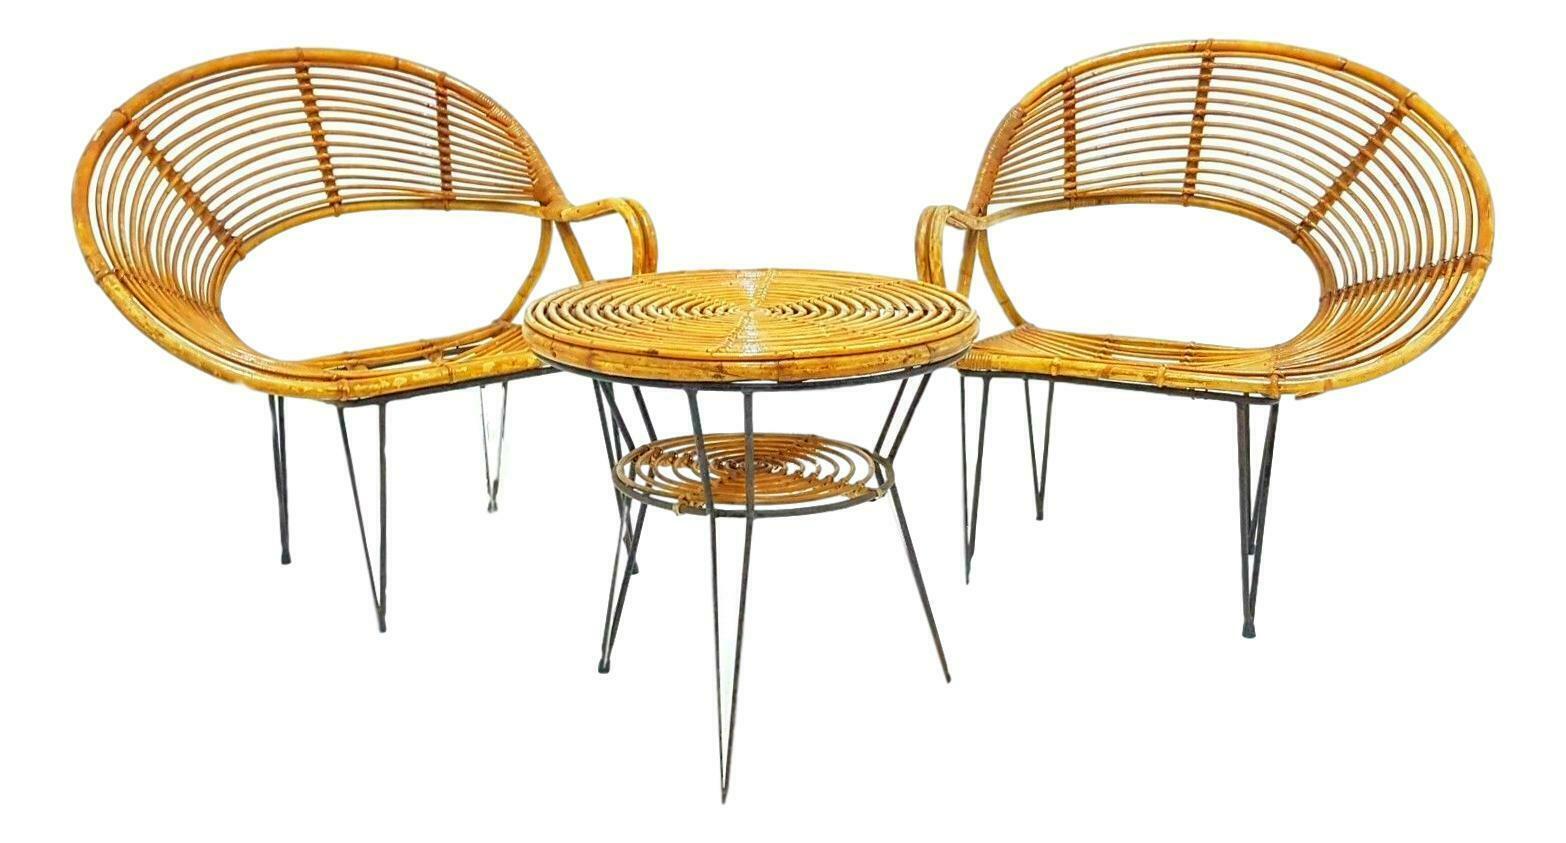 Lounge Chairs and Bamboo Table Design Janine Abraham & Dirk Jan Rol, 1950s For Sale 2